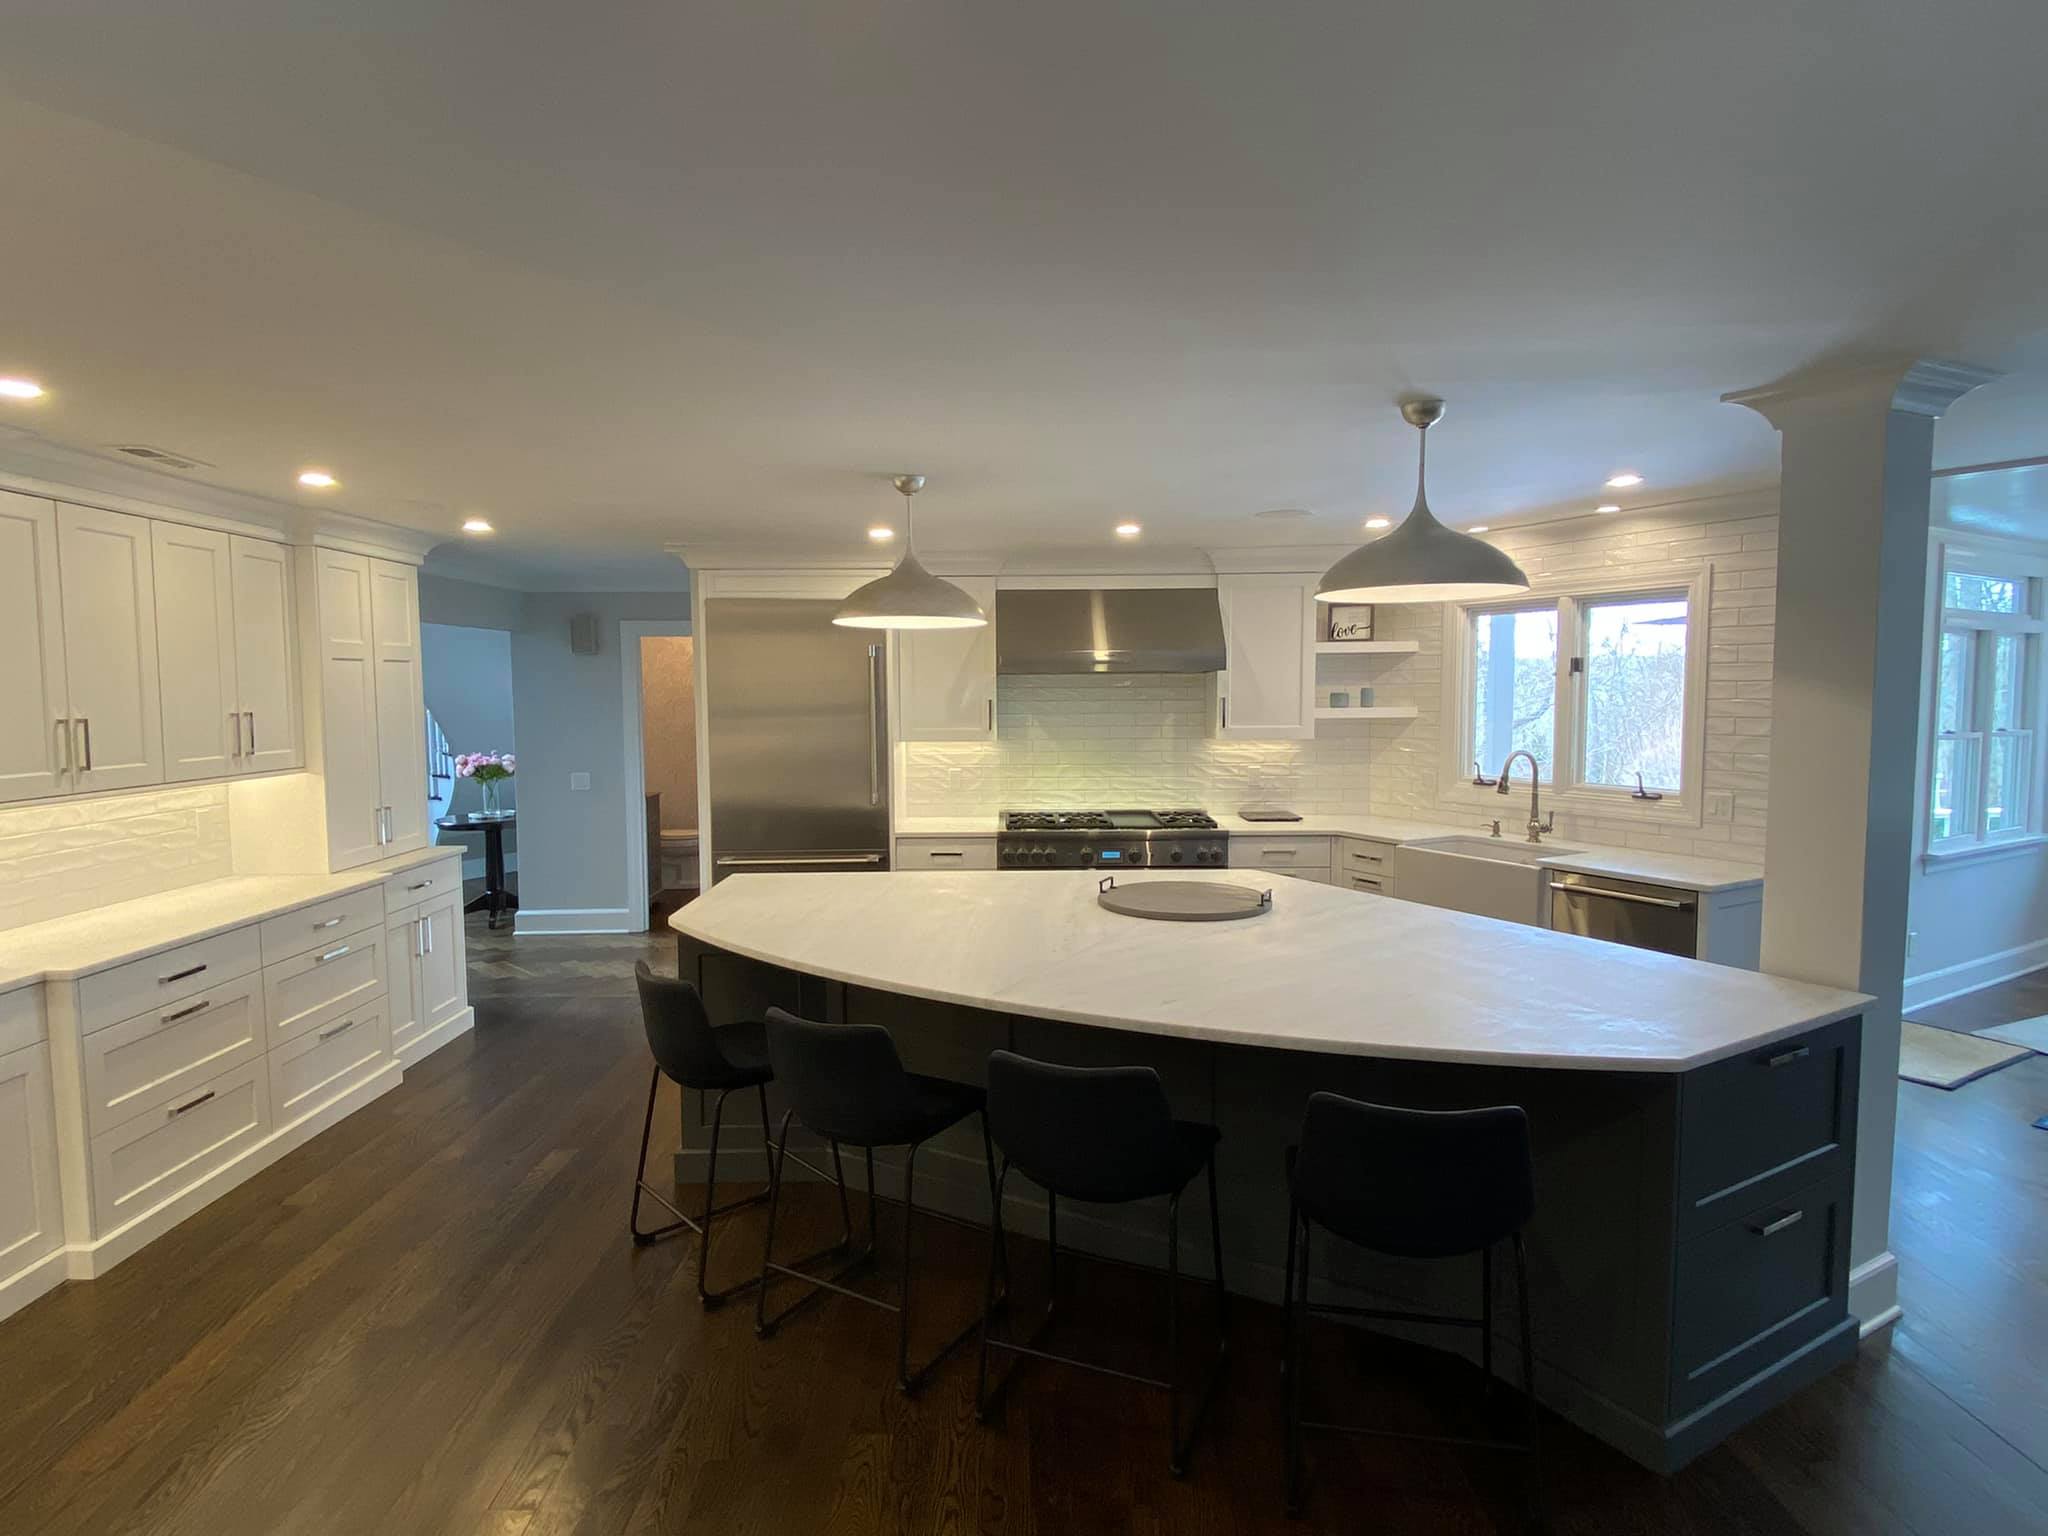 How Much Does a Kitchen Remodel Cost? Fairfield, CT